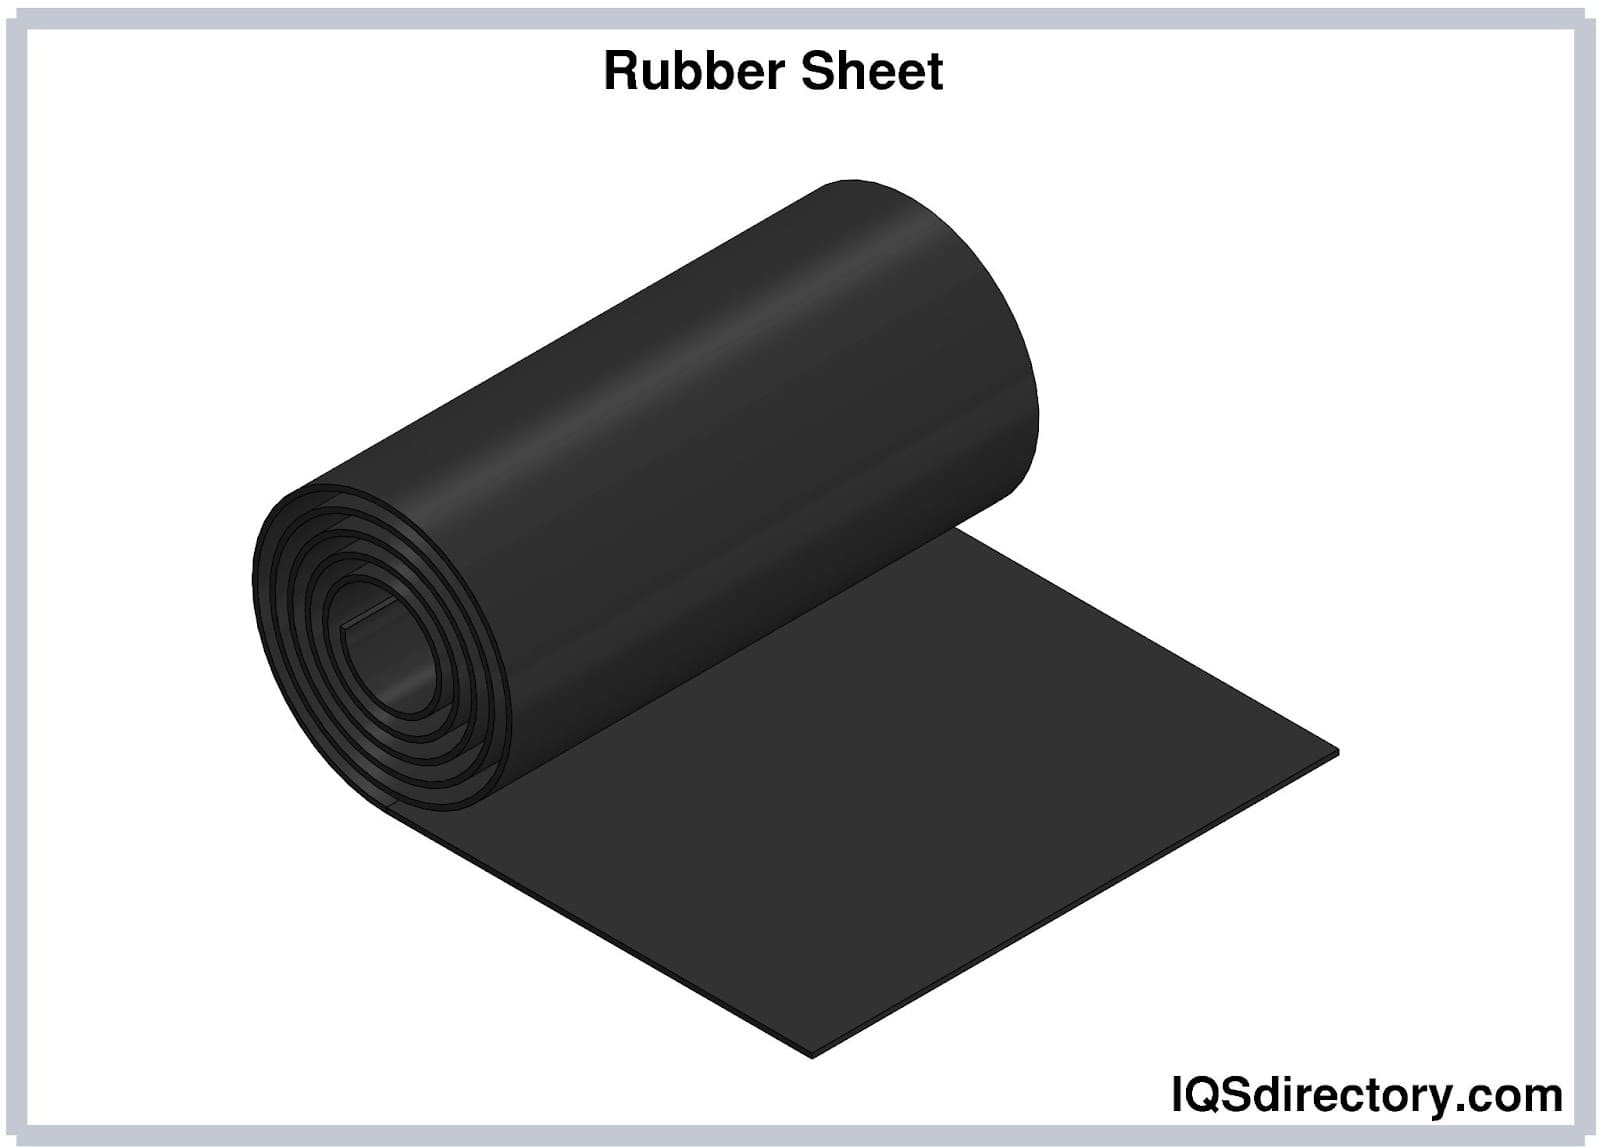 Rubber Sheet: Types, Uses, Features and Benefits